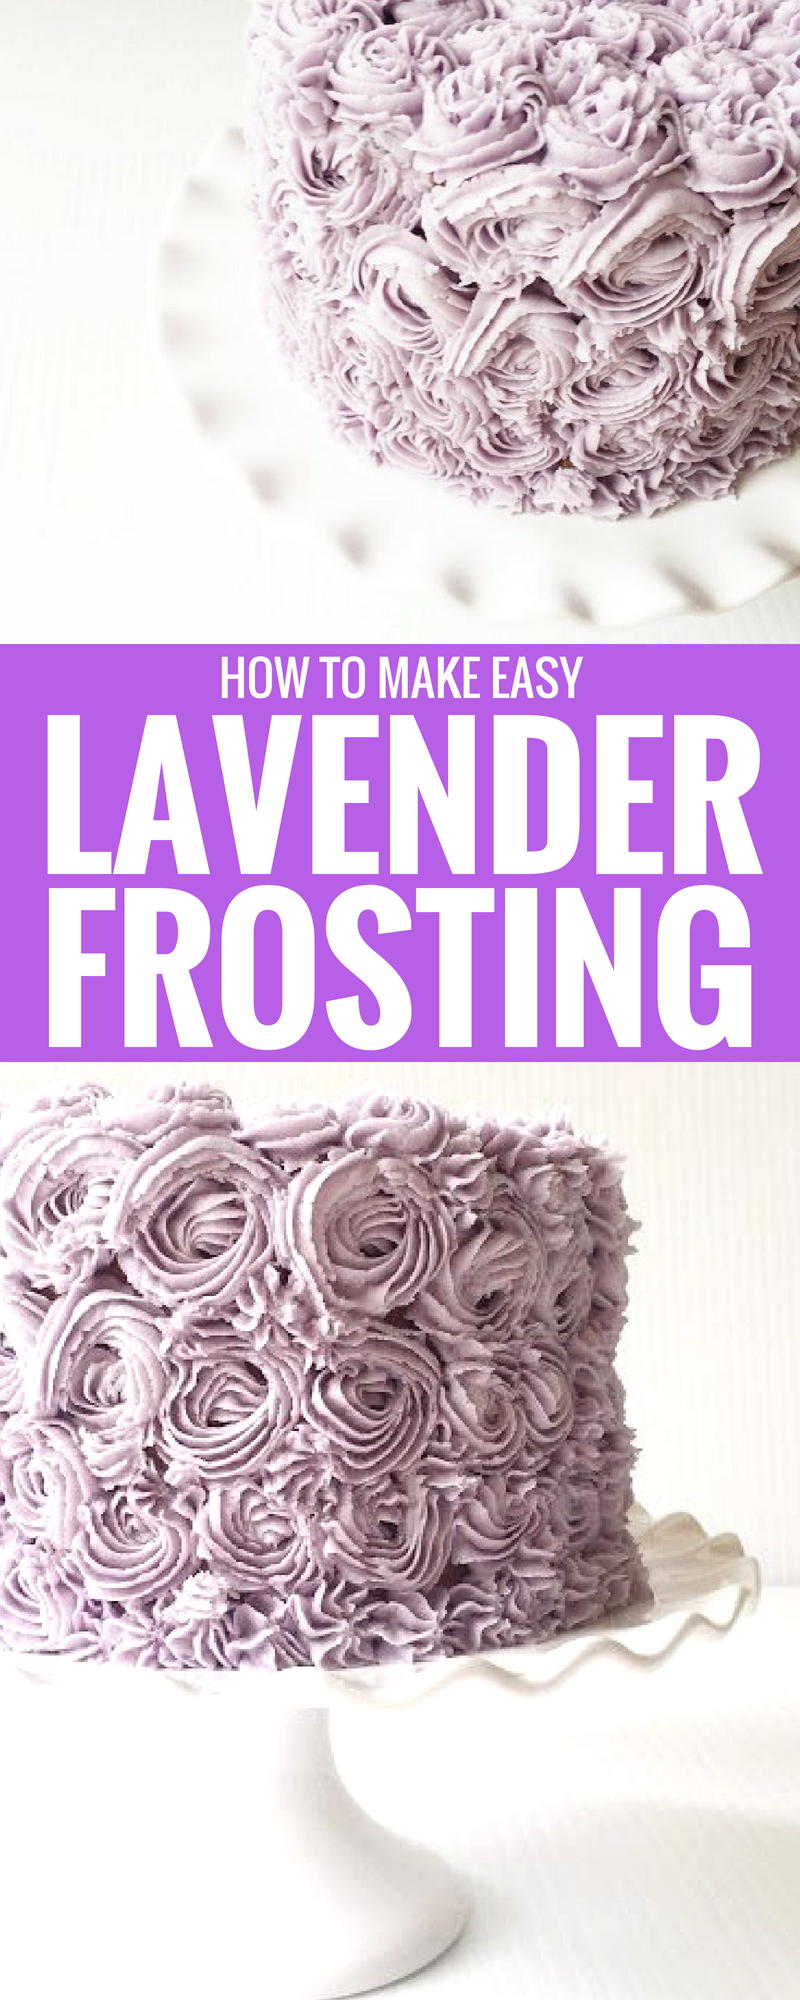 How To Make Easy Lavender Frosting - Frosting Recipe - Cooking With Essential Oils - Easy Icing For Cakes - Icing Recipe - Cake Frosting Recipe - Crusting Icing For Cakes - Buttercream Frosting - Communikait by Kait Hanson